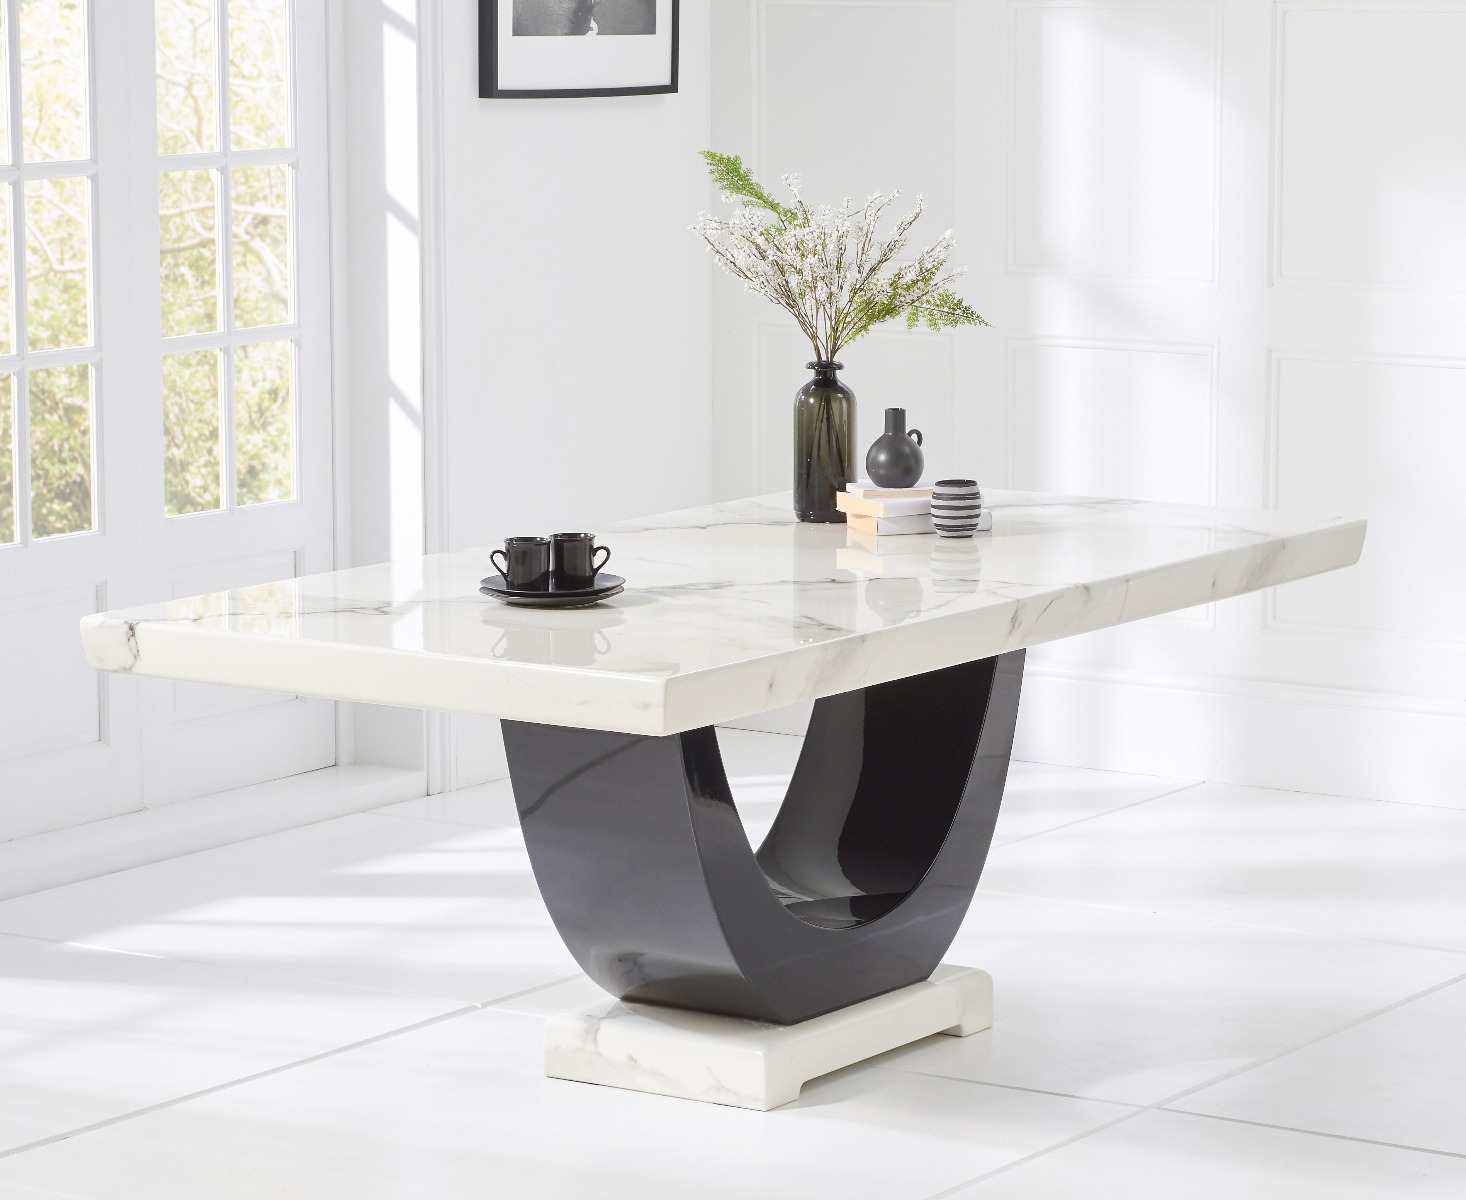 Photo 4 of Novara 170cm white and black pedestal marble dining table with 6 cream sophia chairs